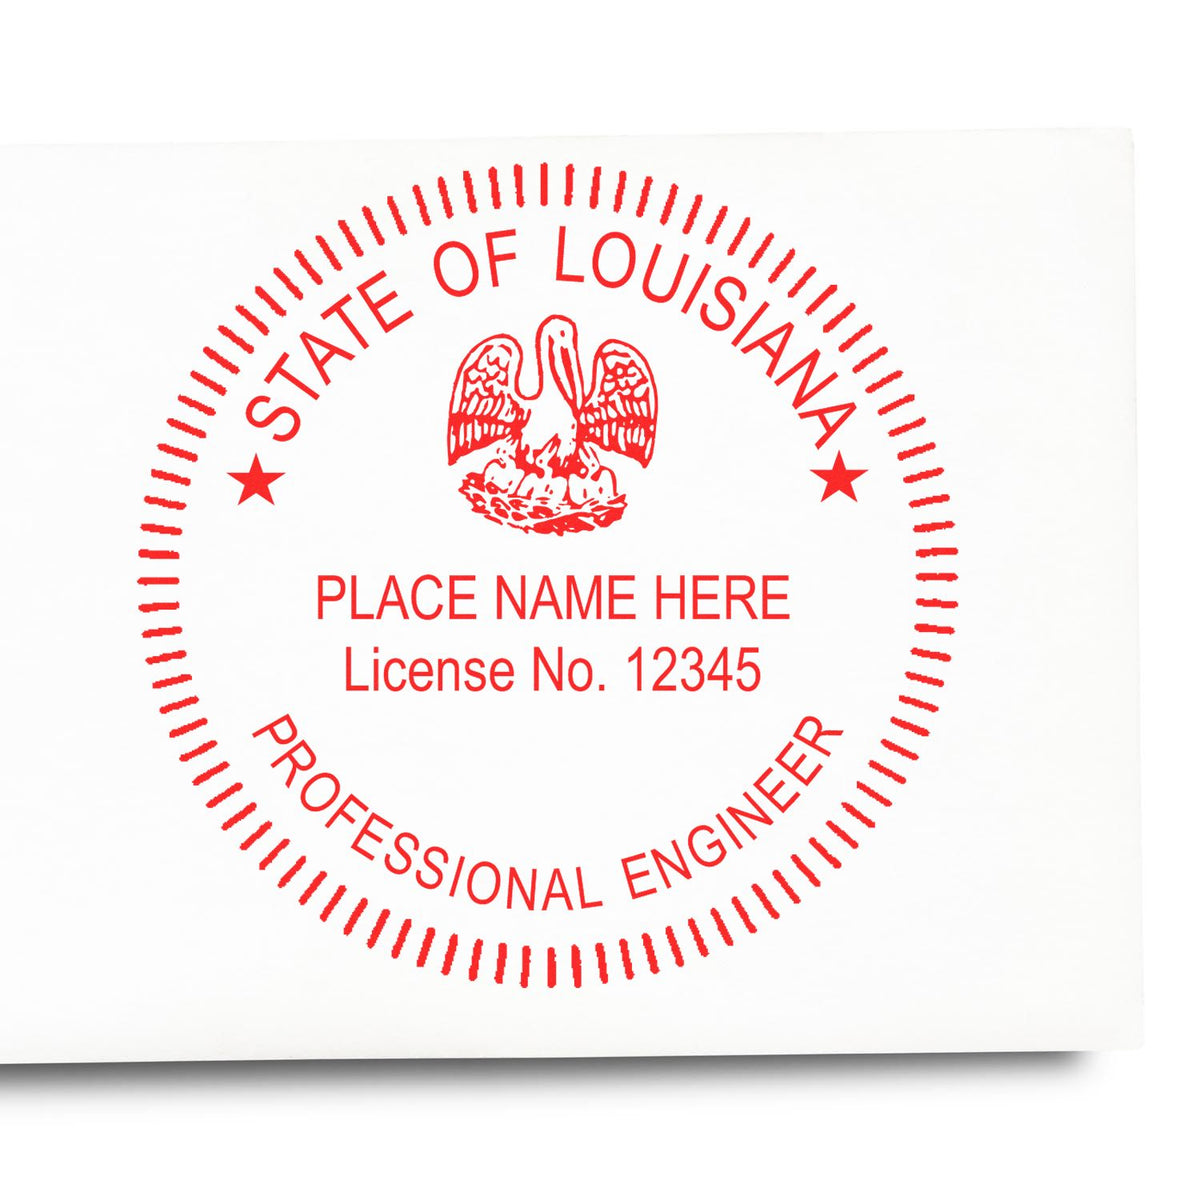 A photograph of the Slim Pre-Inked Louisiana Professional Engineer Seal Stamp stamp impression reveals a vivid, professional image of the on paper.